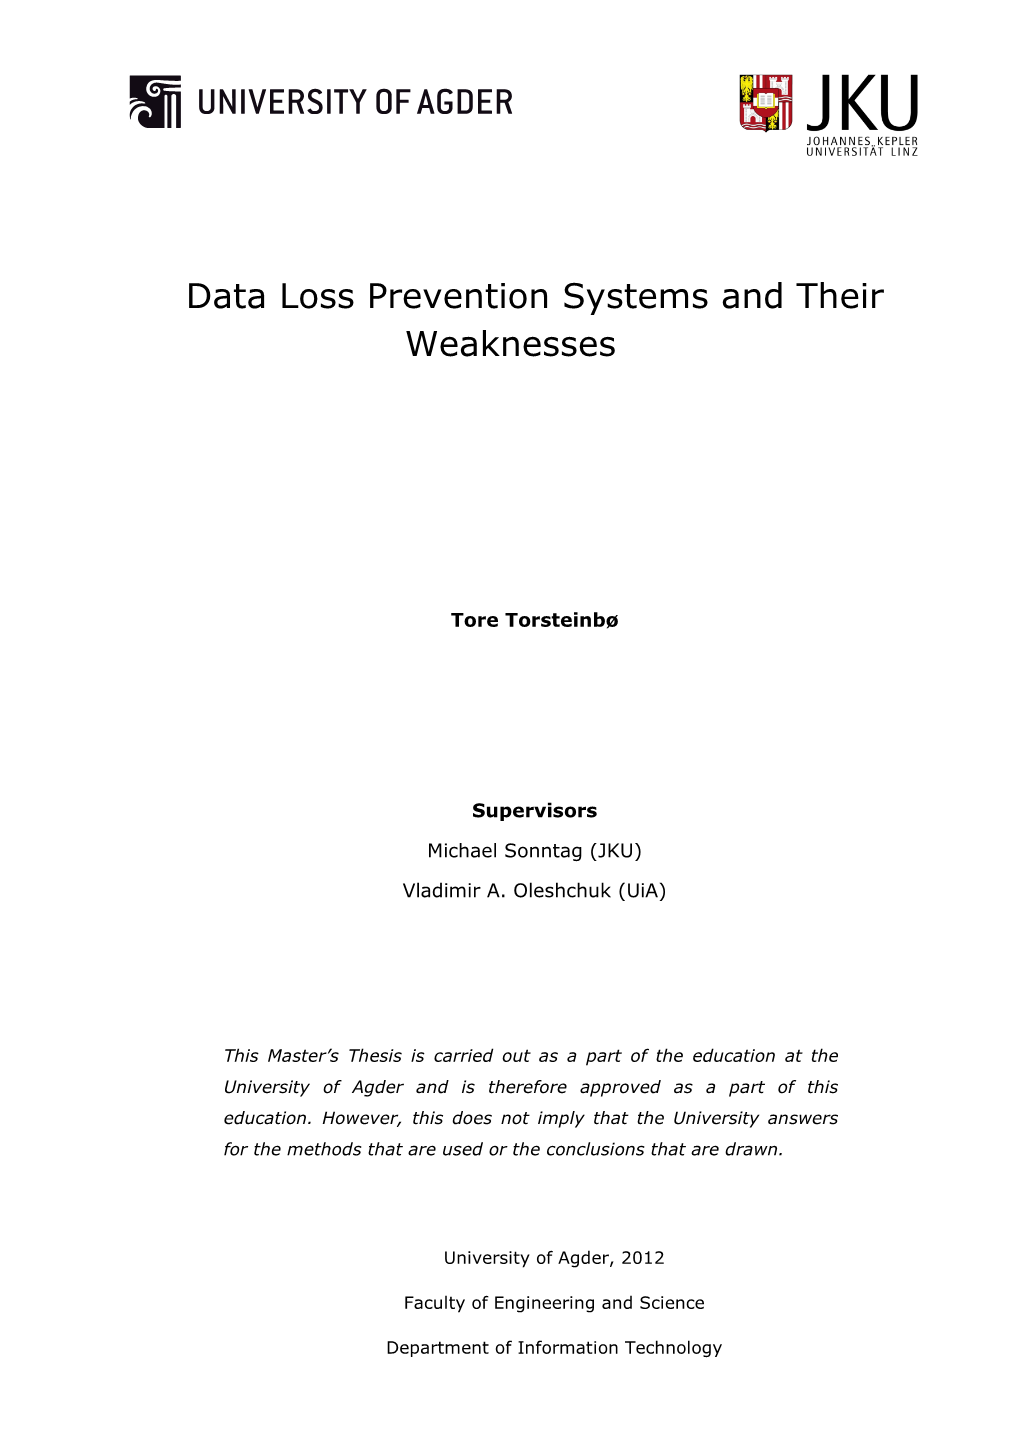 Data Loss Prevention Systems and Their Weaknesses